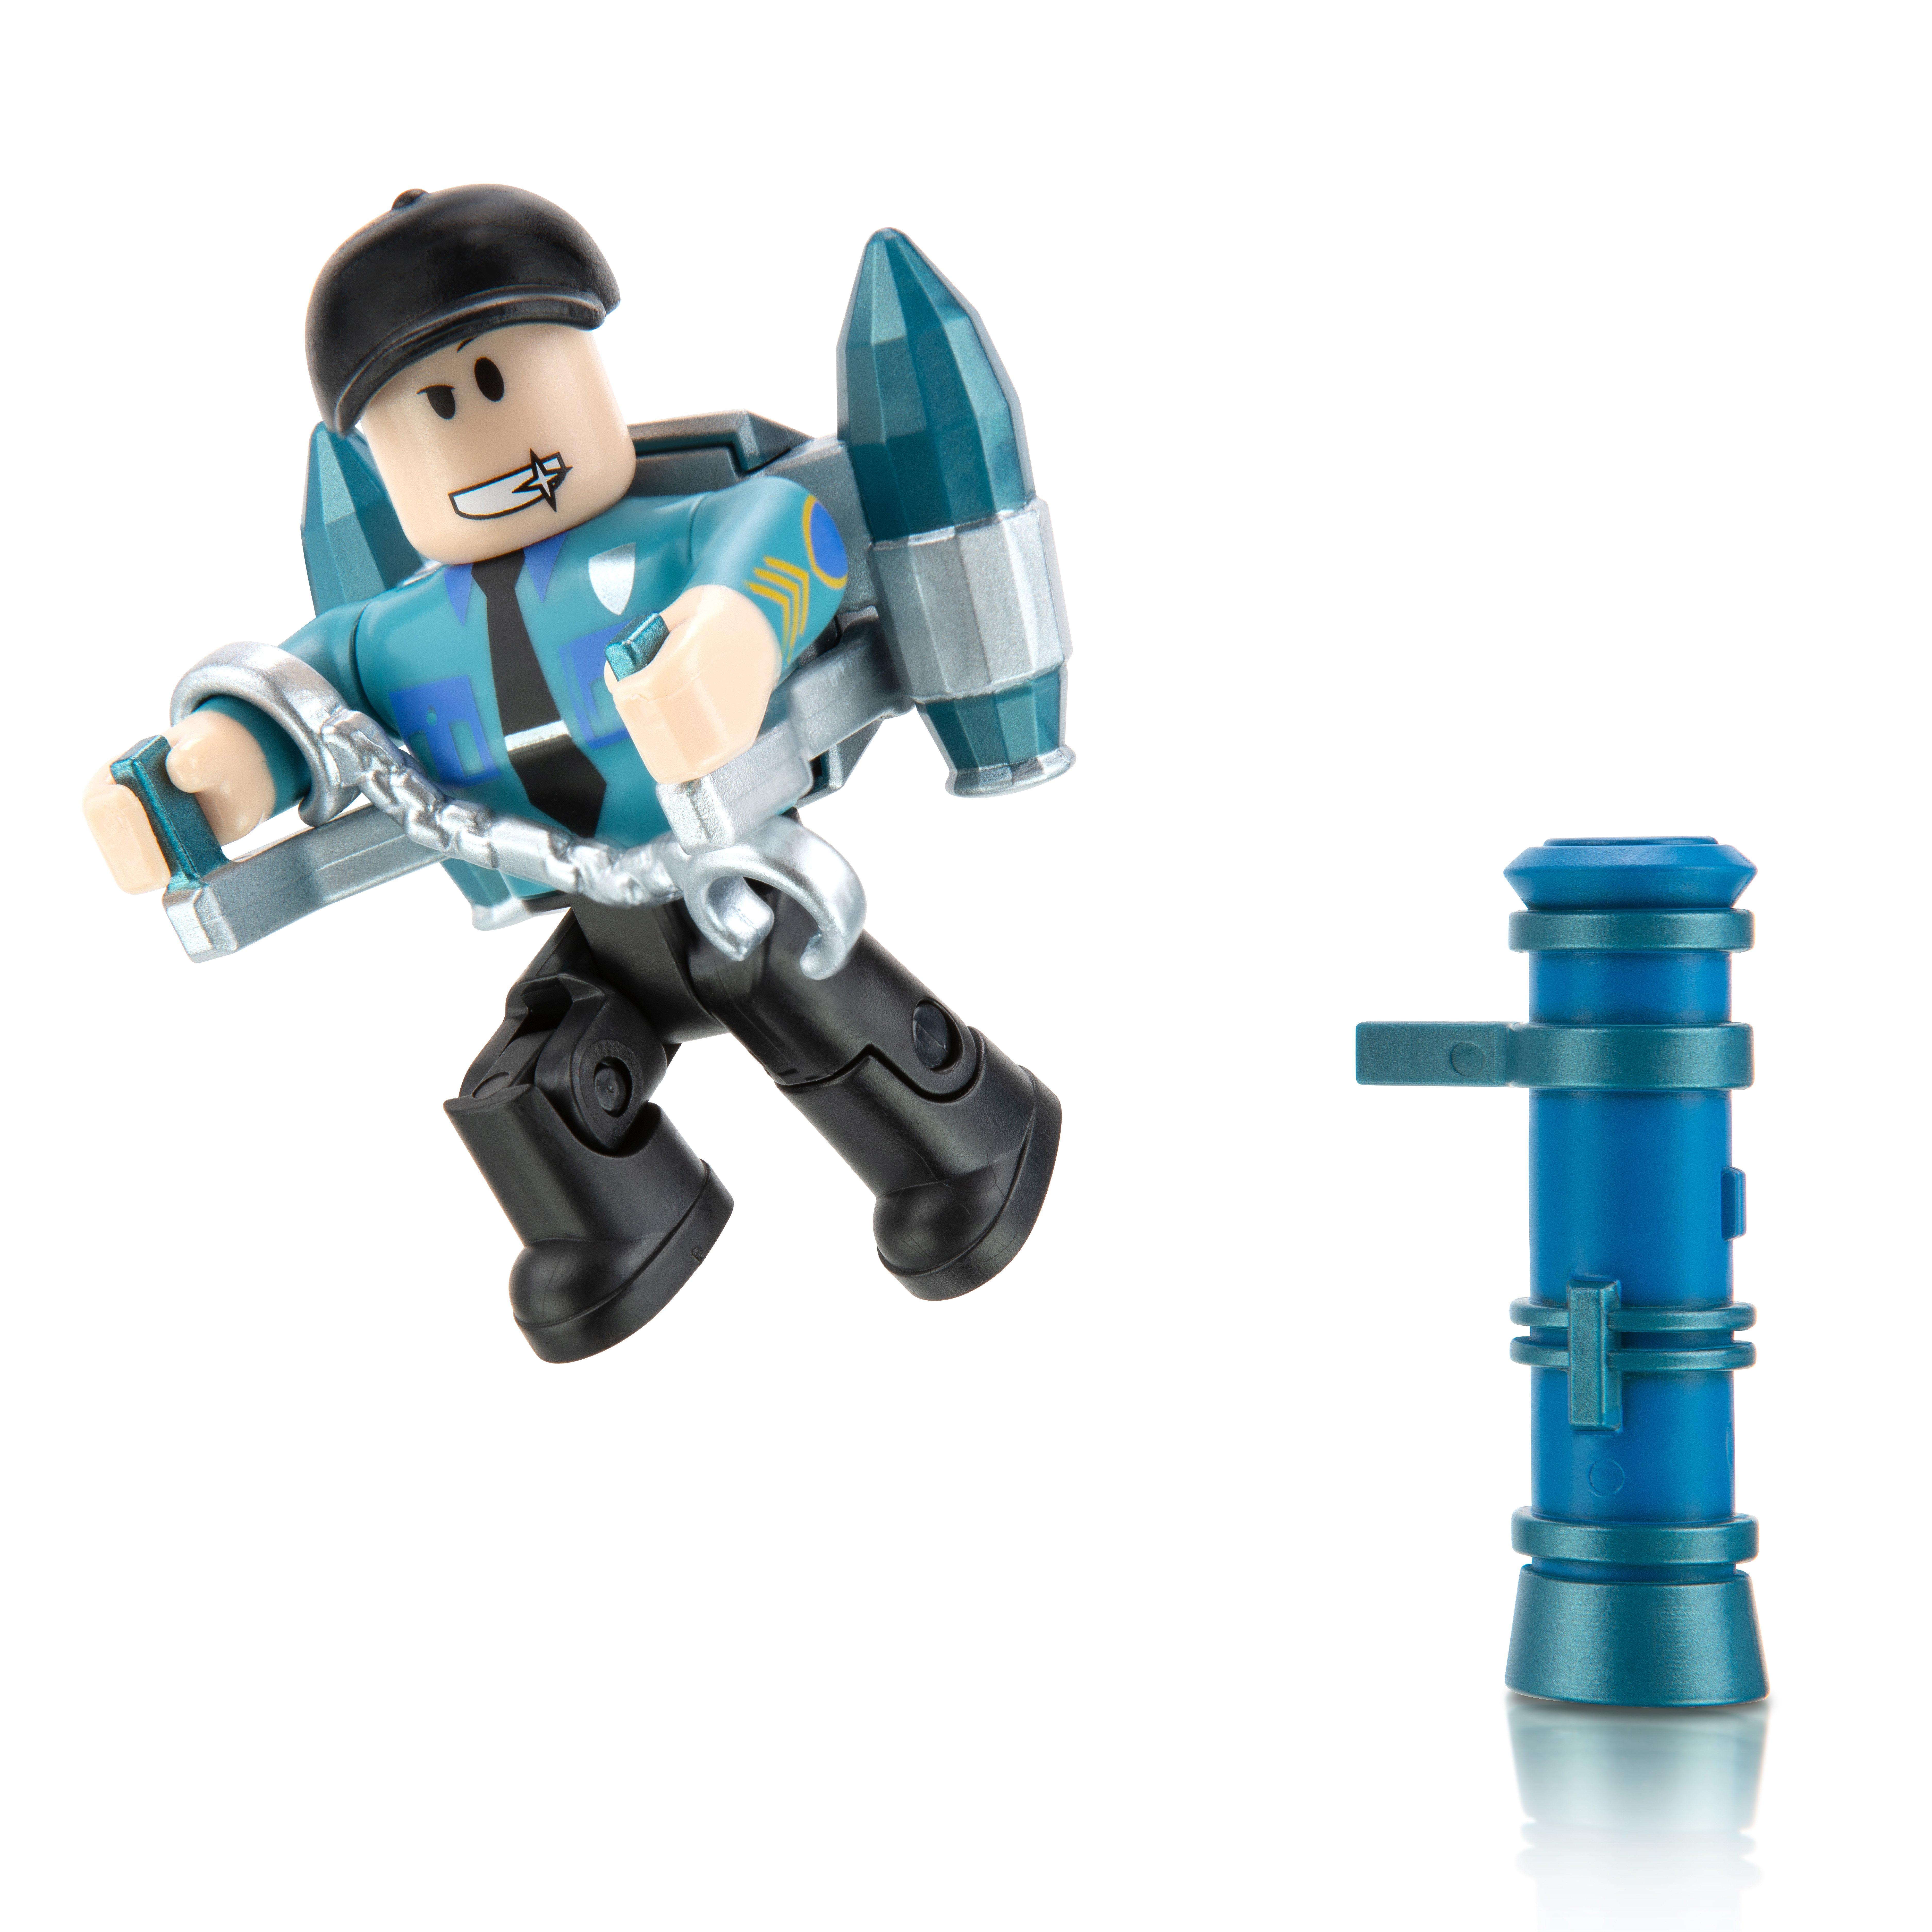 Roblox Action Collection Single Figure Pack Includes 1 Exclusive Virtual Item Styles May Vary Gamestop - roblox xbox gamestop